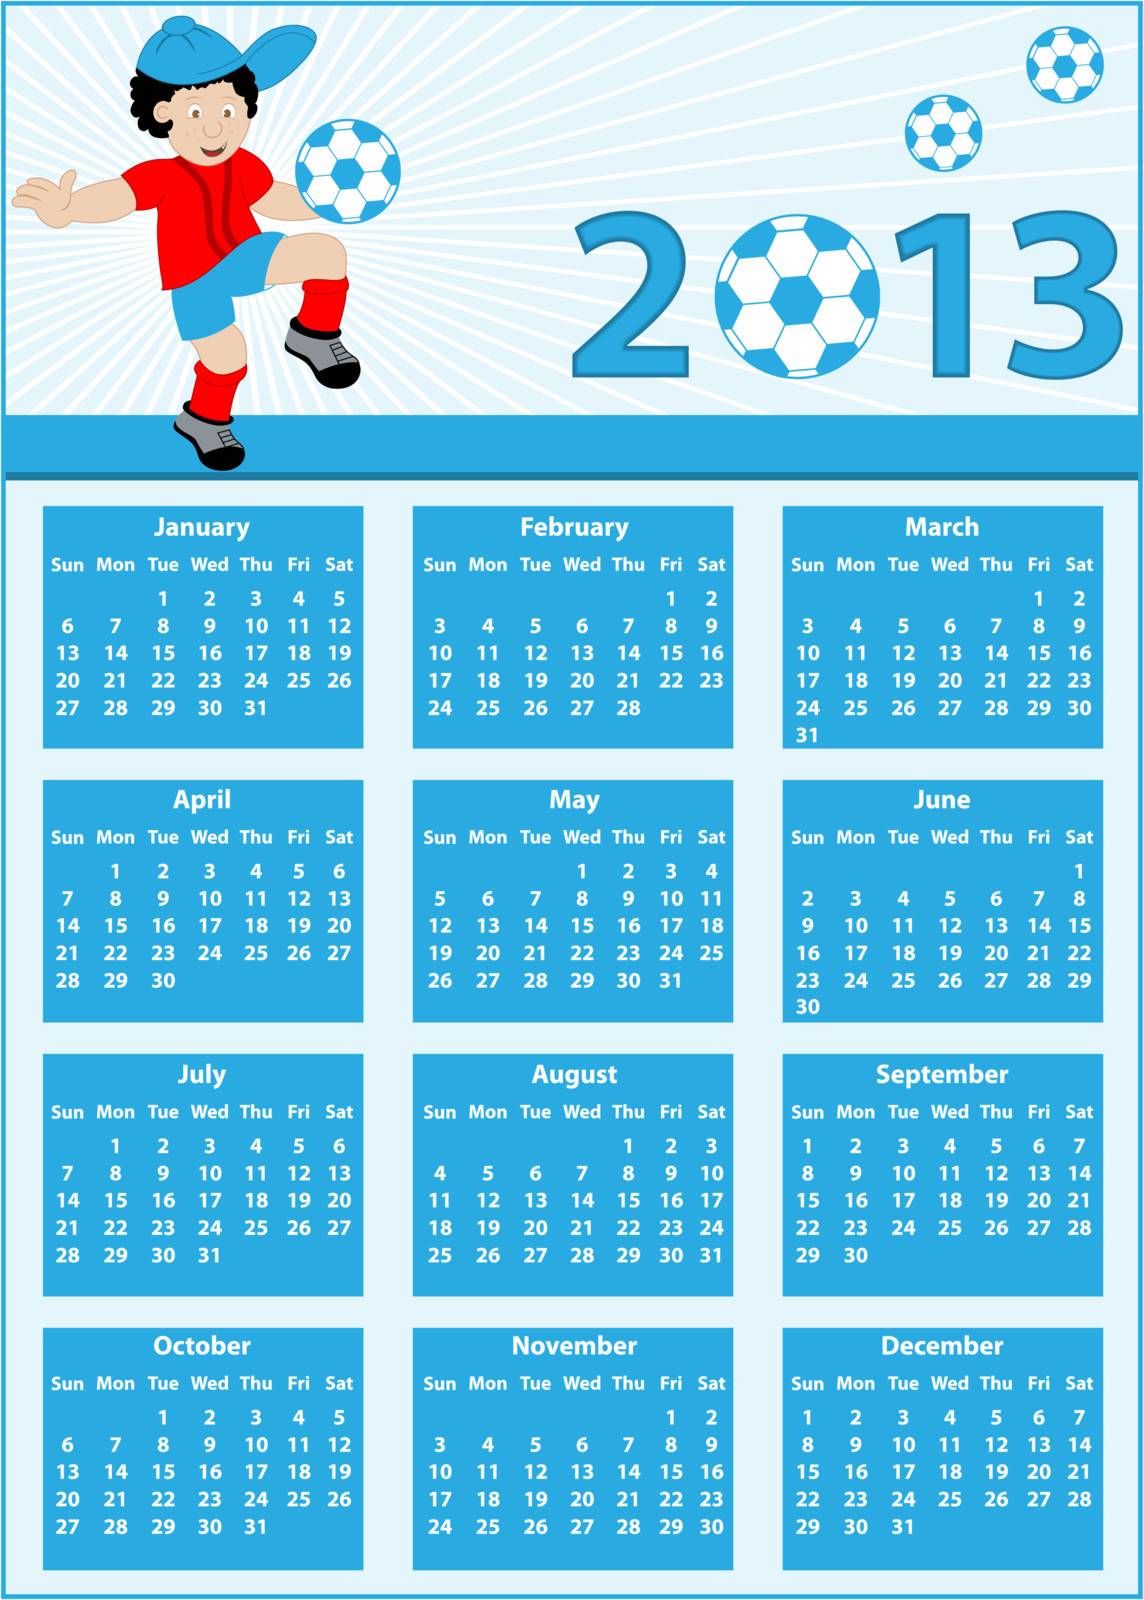 Calendar 2013 with football player by toots